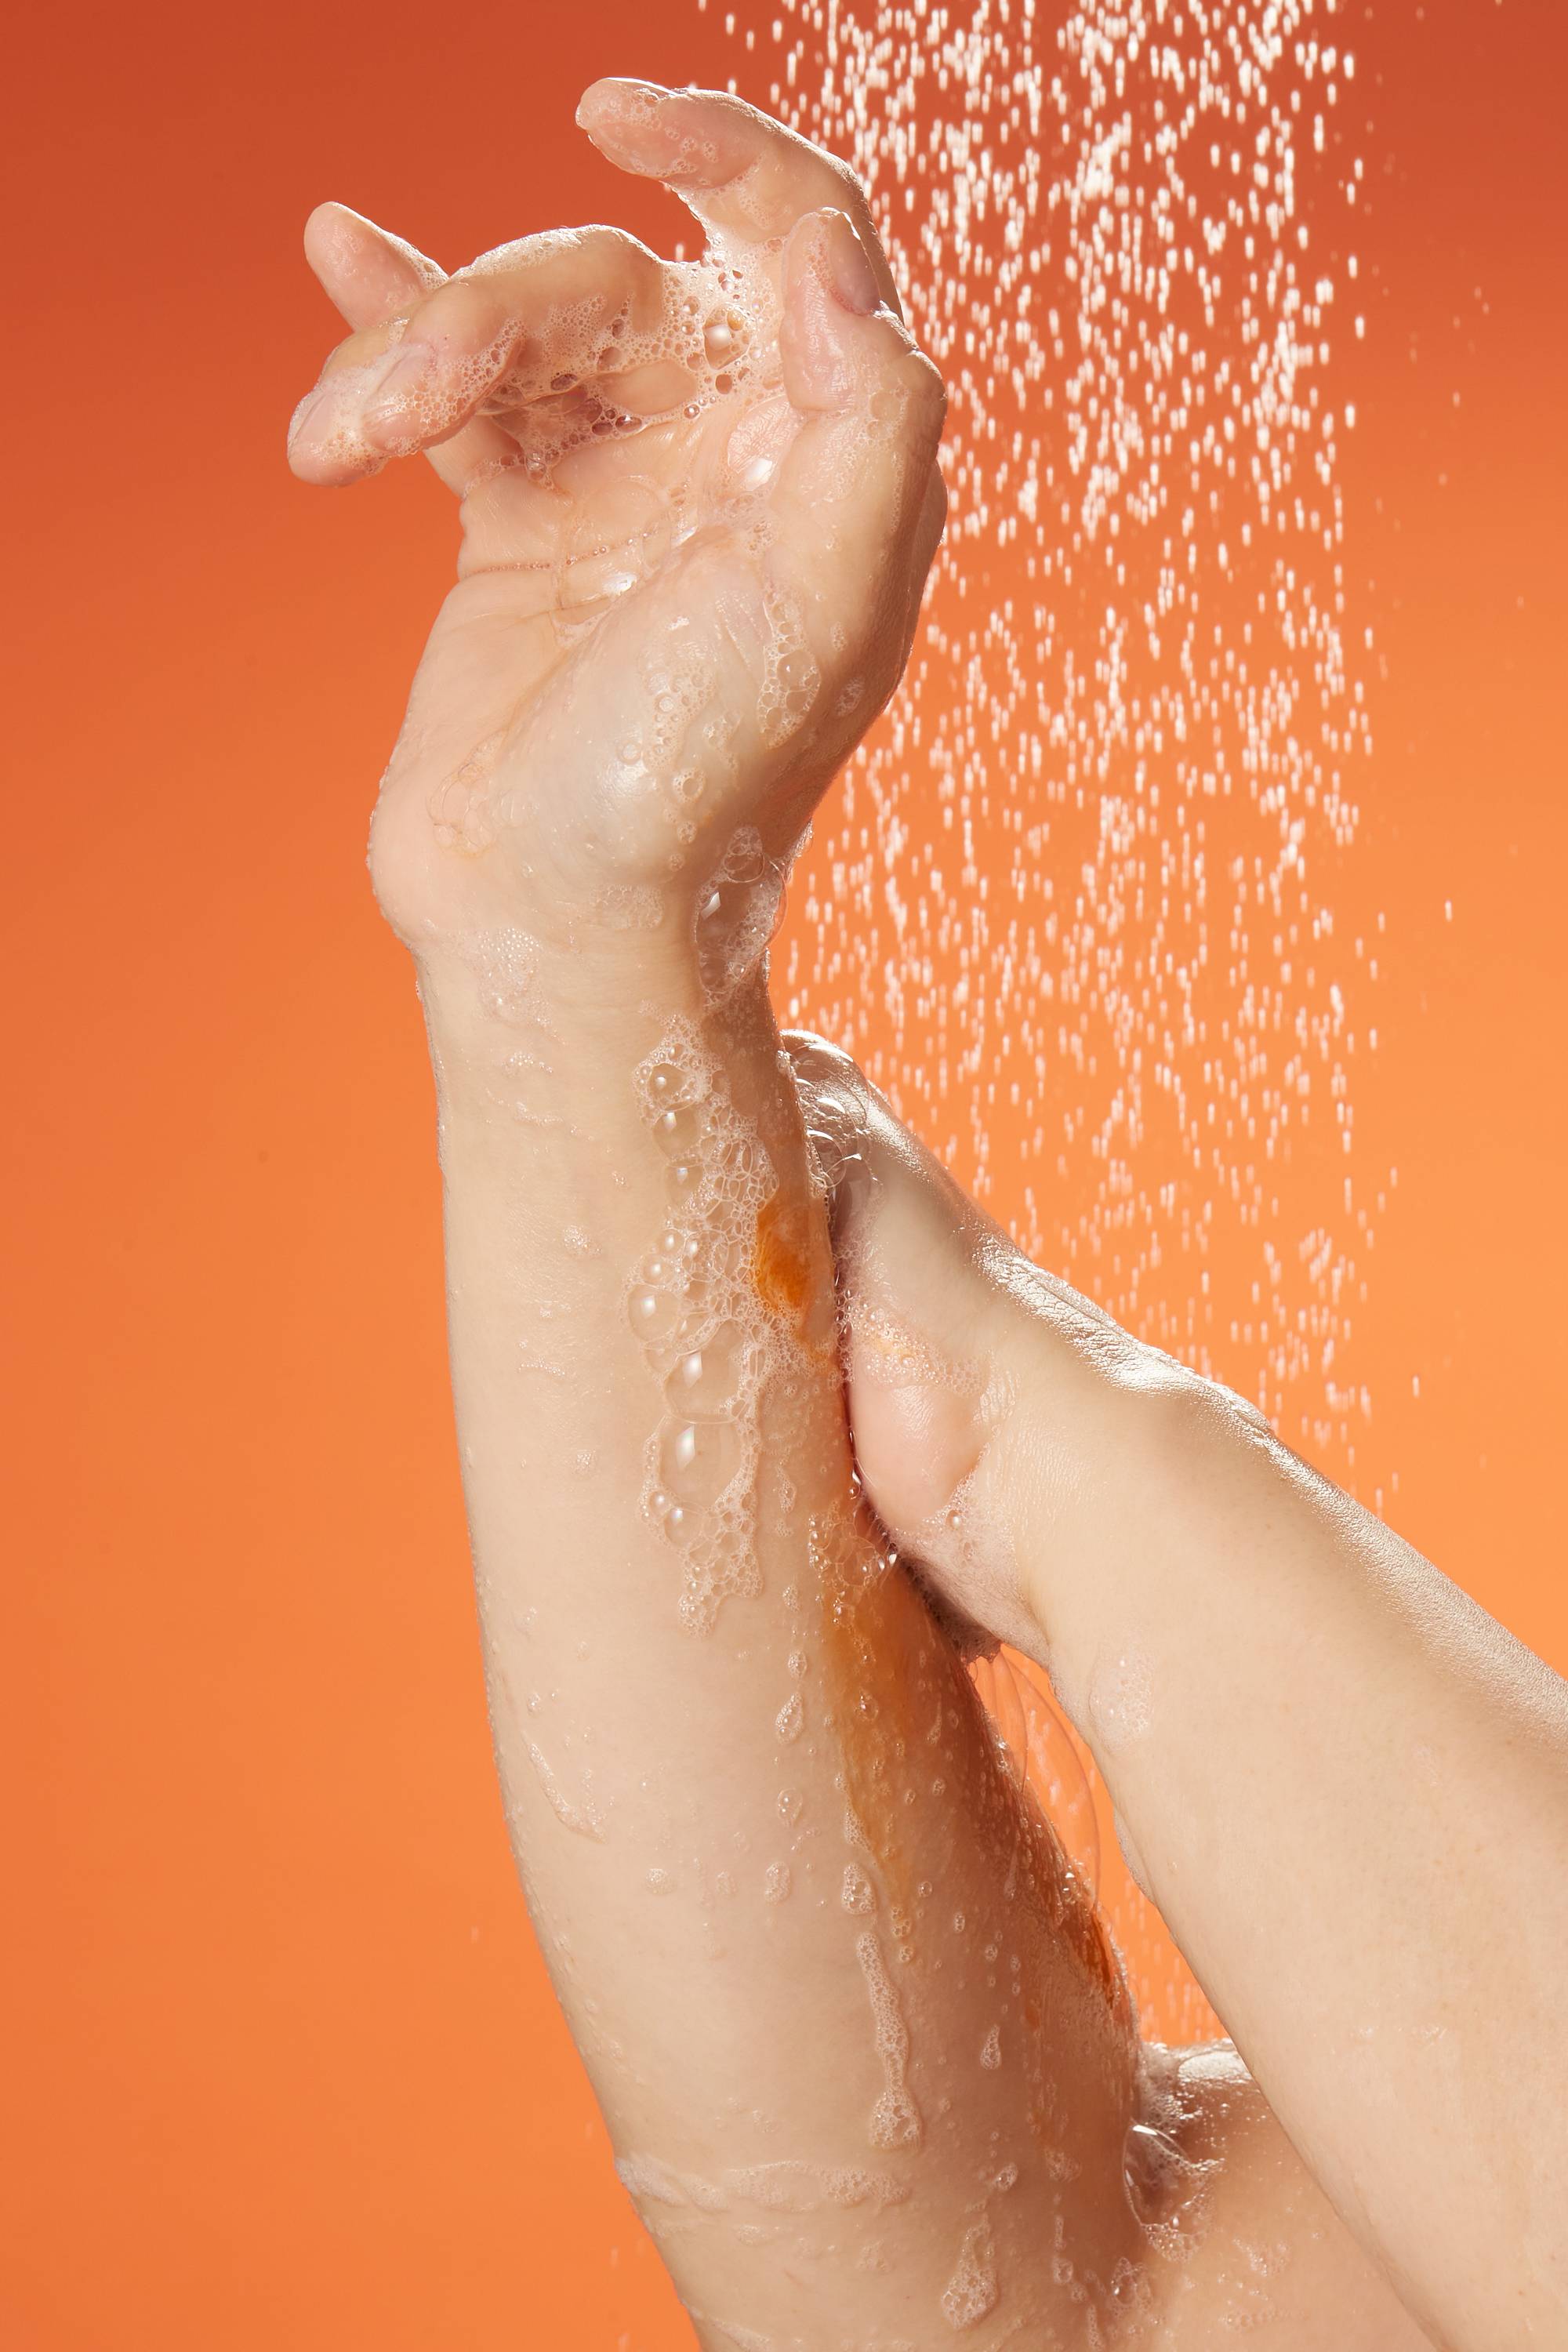 A close-up of the model's hands and forearms as they get soapy, shower gel suds over their skin under the shower water.